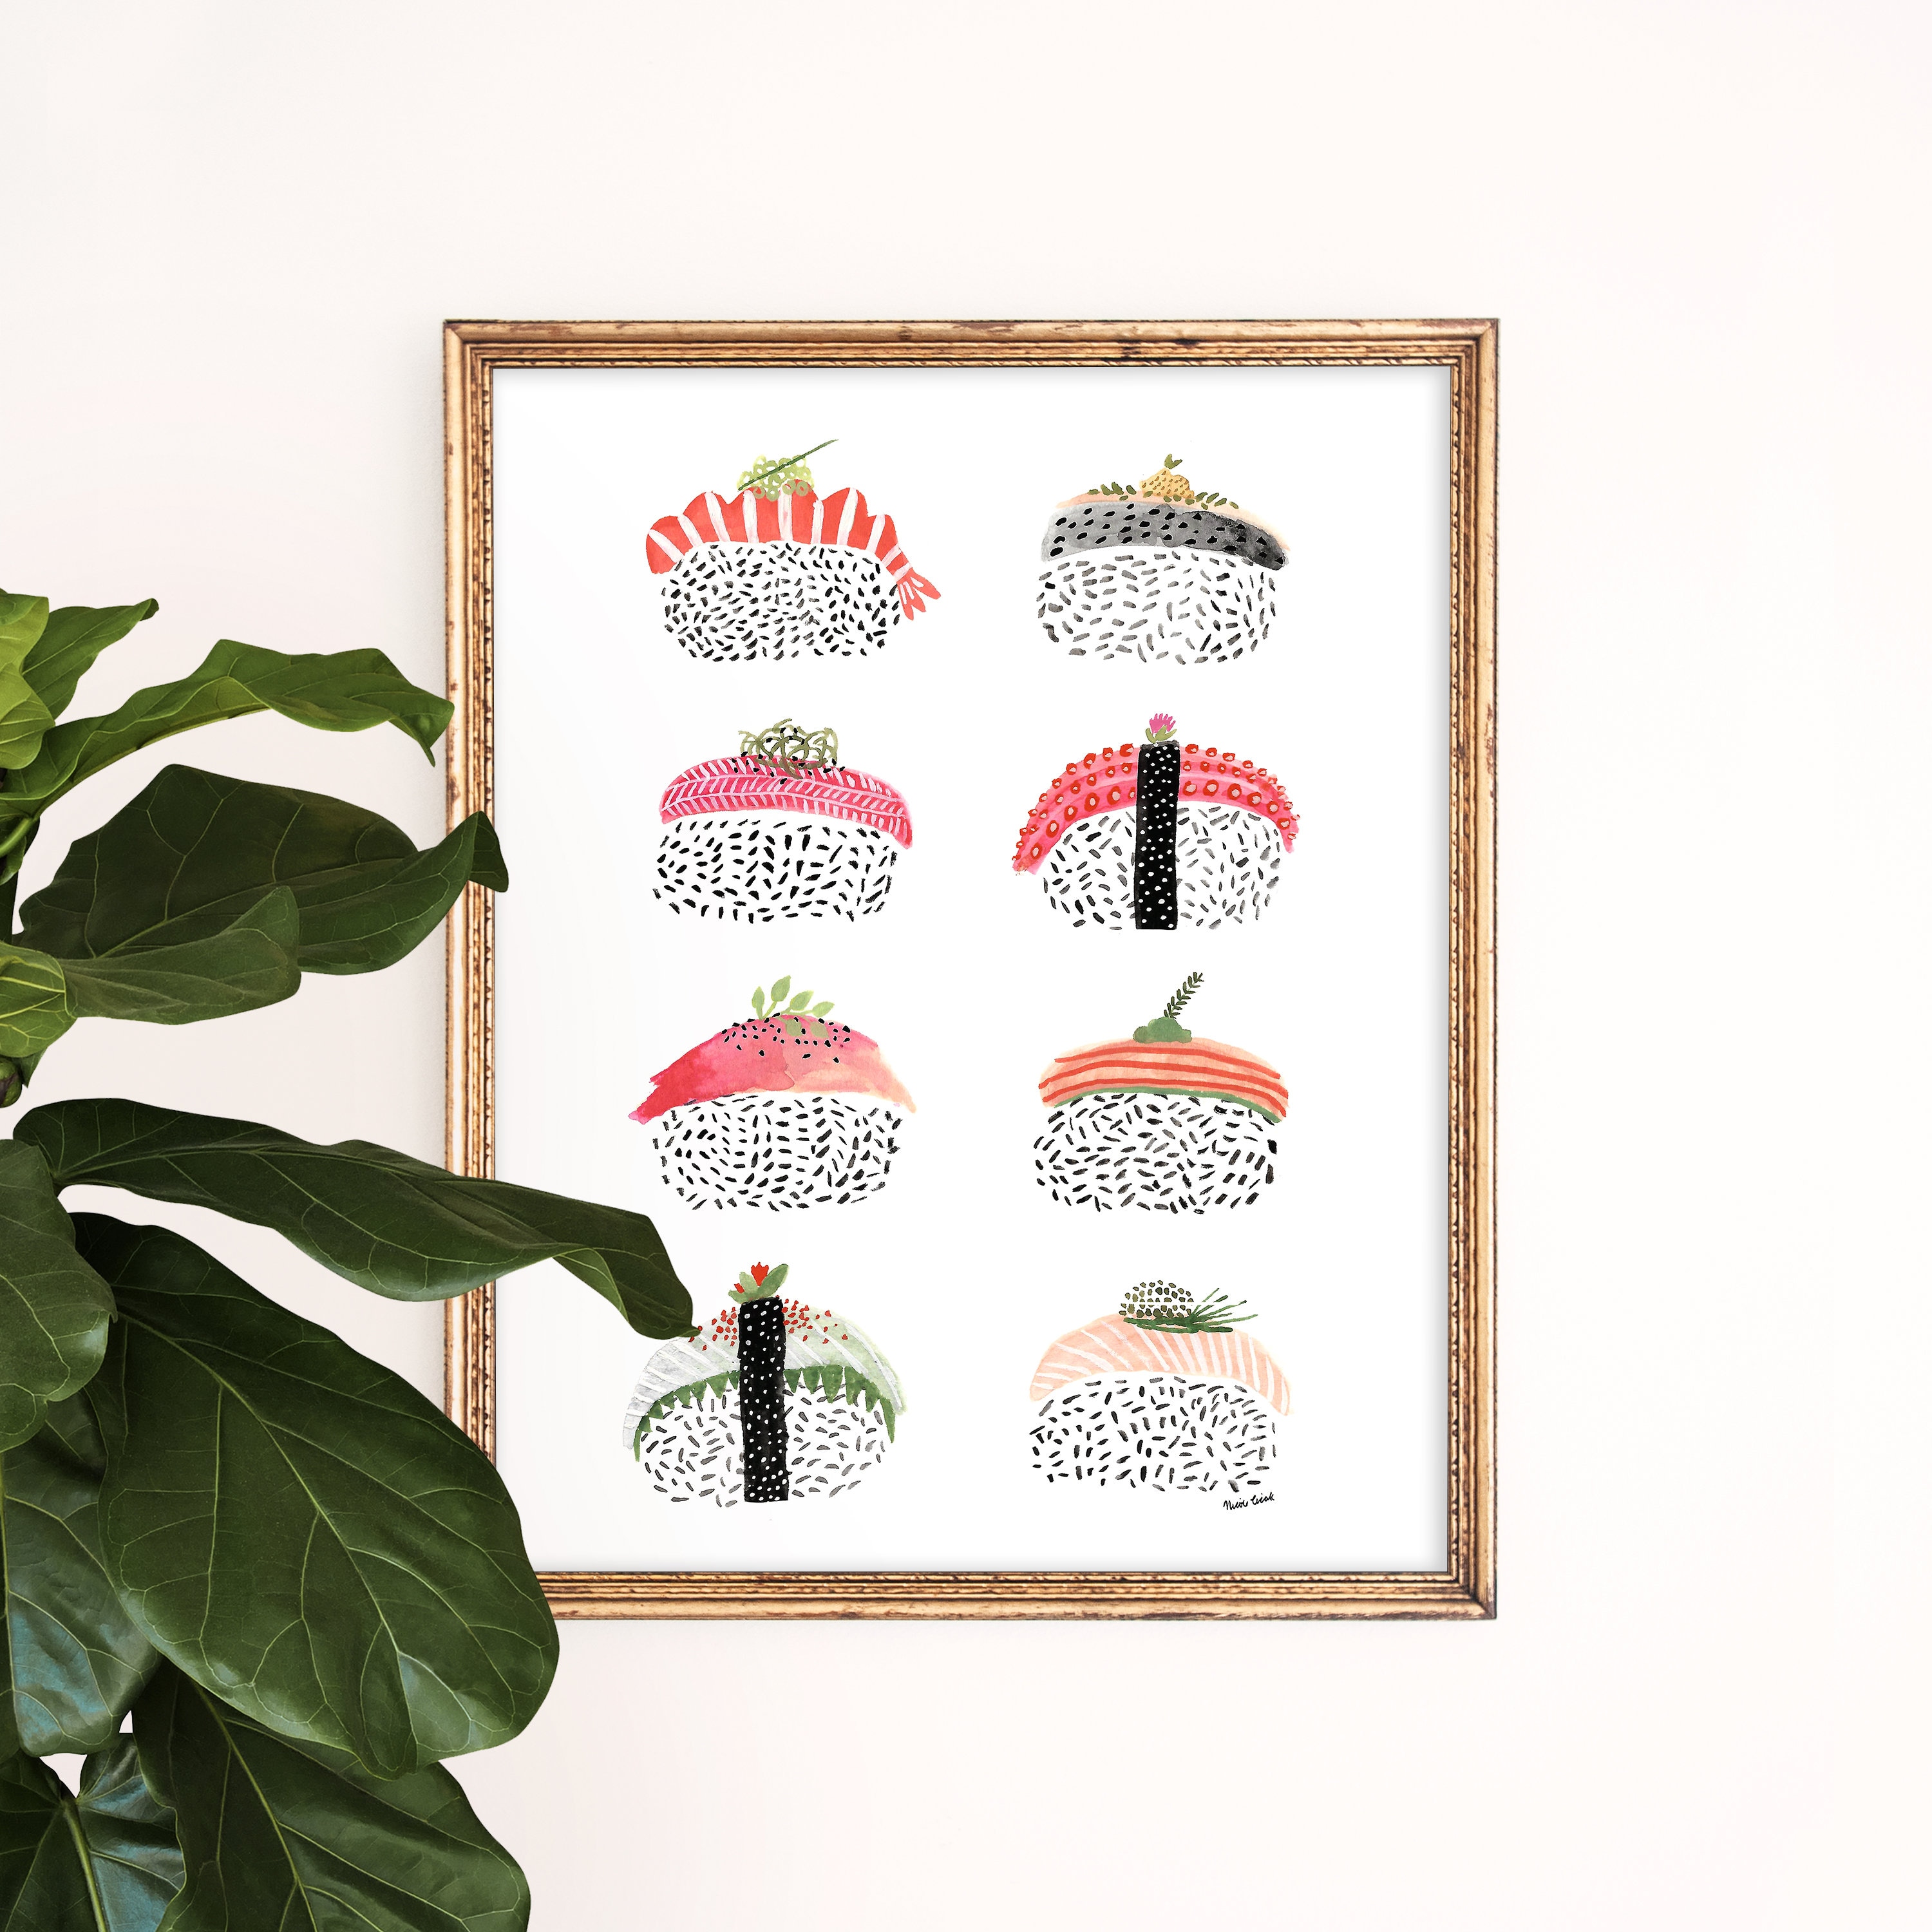 Sushi Lovers Gift, Sushi Guide Illustration, Vintage Style, Illustration  Art Print, Home Decor, Foodie, Poster, Japanese Food, Gift Idea